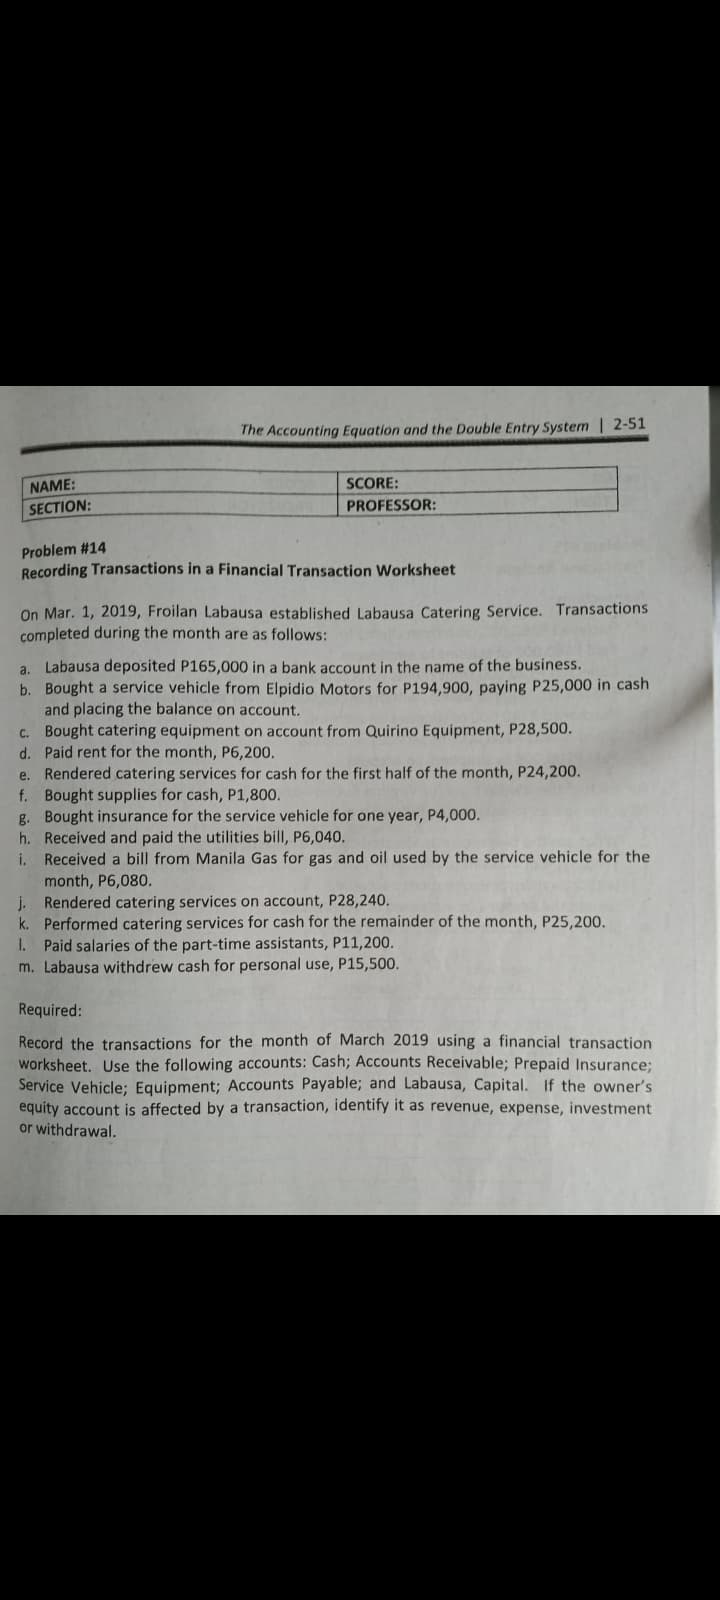 The Accounting Equation and the Double Entry System | 2-51
NAME:
SCORE:
SECTION:
PROFESSOR:
Problem #14
Recording Transactions in a Financial Transaction Worksheet
On Mar. 1, 2019, Froilan Labausa established Labausa Catering Service. Transactions
completed during the month are as follows:
a. Labausa deposited P165,000 in a bank account in the name of the business.
b. Bought a service vehicle from Elpidio Motors for P194,900, paying P25,000 in cash
and placing the balance on account.
c. Bought catering equipment on account from Quirino Equipment, P28,500.
d. Paid rent for the month, P6,200.
Rendered catering services for cash for the first half of the month, P24,200.
f. Bought supplies for cash, P1,800.
g. Bought insurance for the service vehicle for one year, P4,000.
h. Received and paid the utilities bill, P6,040.
i. Received a bill from Manila Gas for gas and oil used by the service vehicle for the
month, P6,080.
Rendered catering services on account, P28,240.
k. Performed catering services for cash for the remainder of the month, P25,200.
I. Paid salaries of the part-time assistants, P11,200.
m. Labausa withdrew cash for personal use, P15,500.
e.
Required:
Record the transactions for the month of March 2019 using a financial transaction
worksheet. Use the following accounts: Cash; Accounts Receivable; Prepaid Insurance;
Service Vehicle; Equipment; Accounts Payable; and Labausa, Capital. If the owner's
equity account is affected by a transaction, identify it as revenue, expense, investment
or withdrawal.
